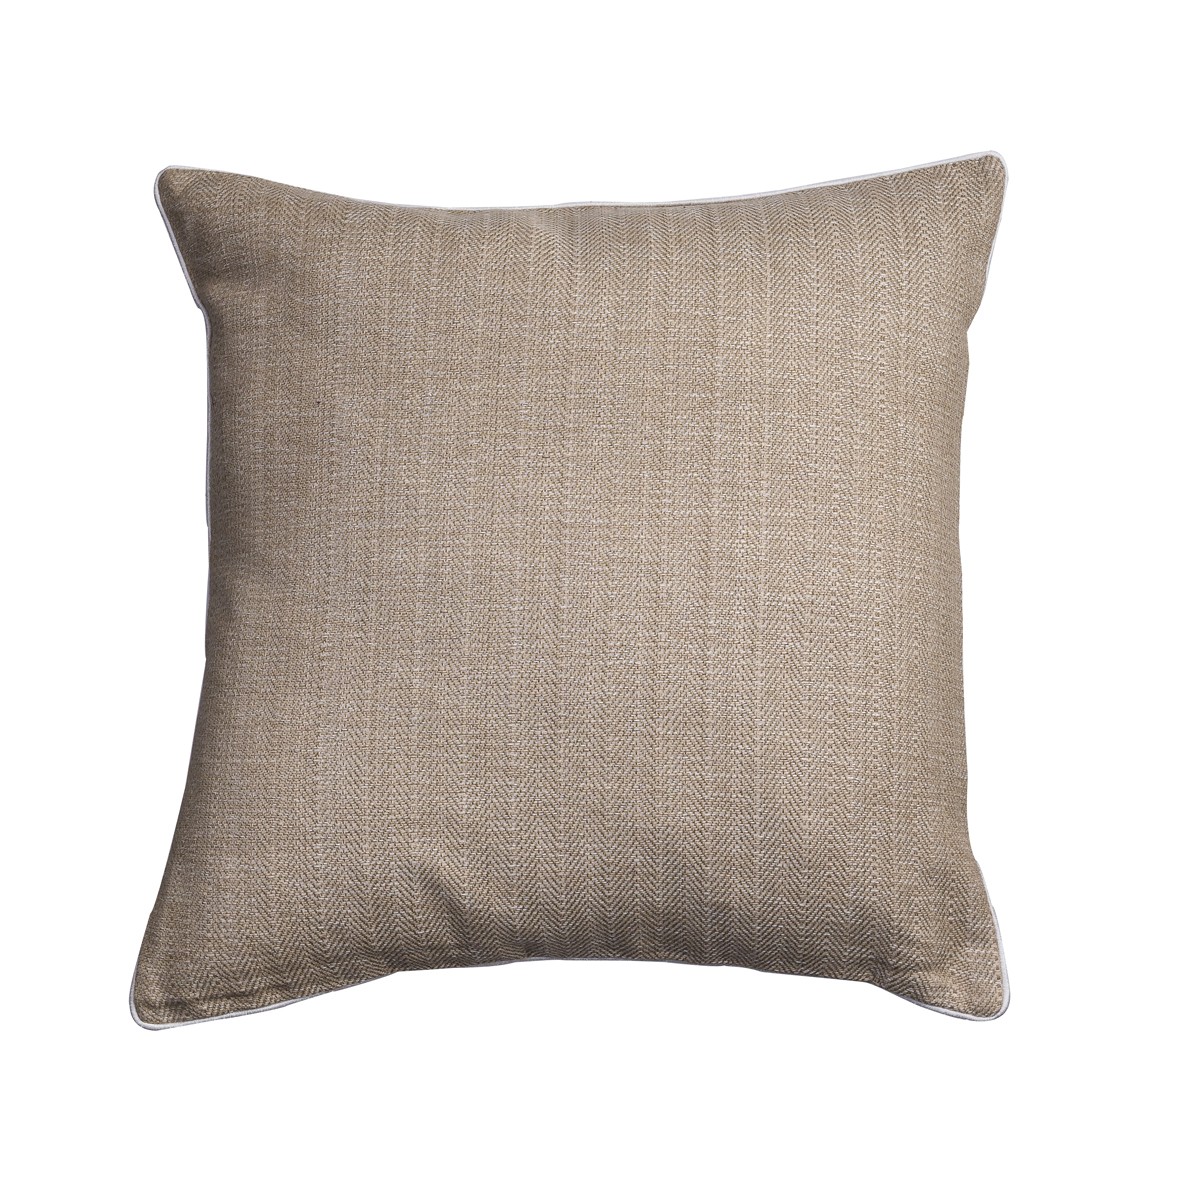 Single Sand Cushion Cover With White Piping